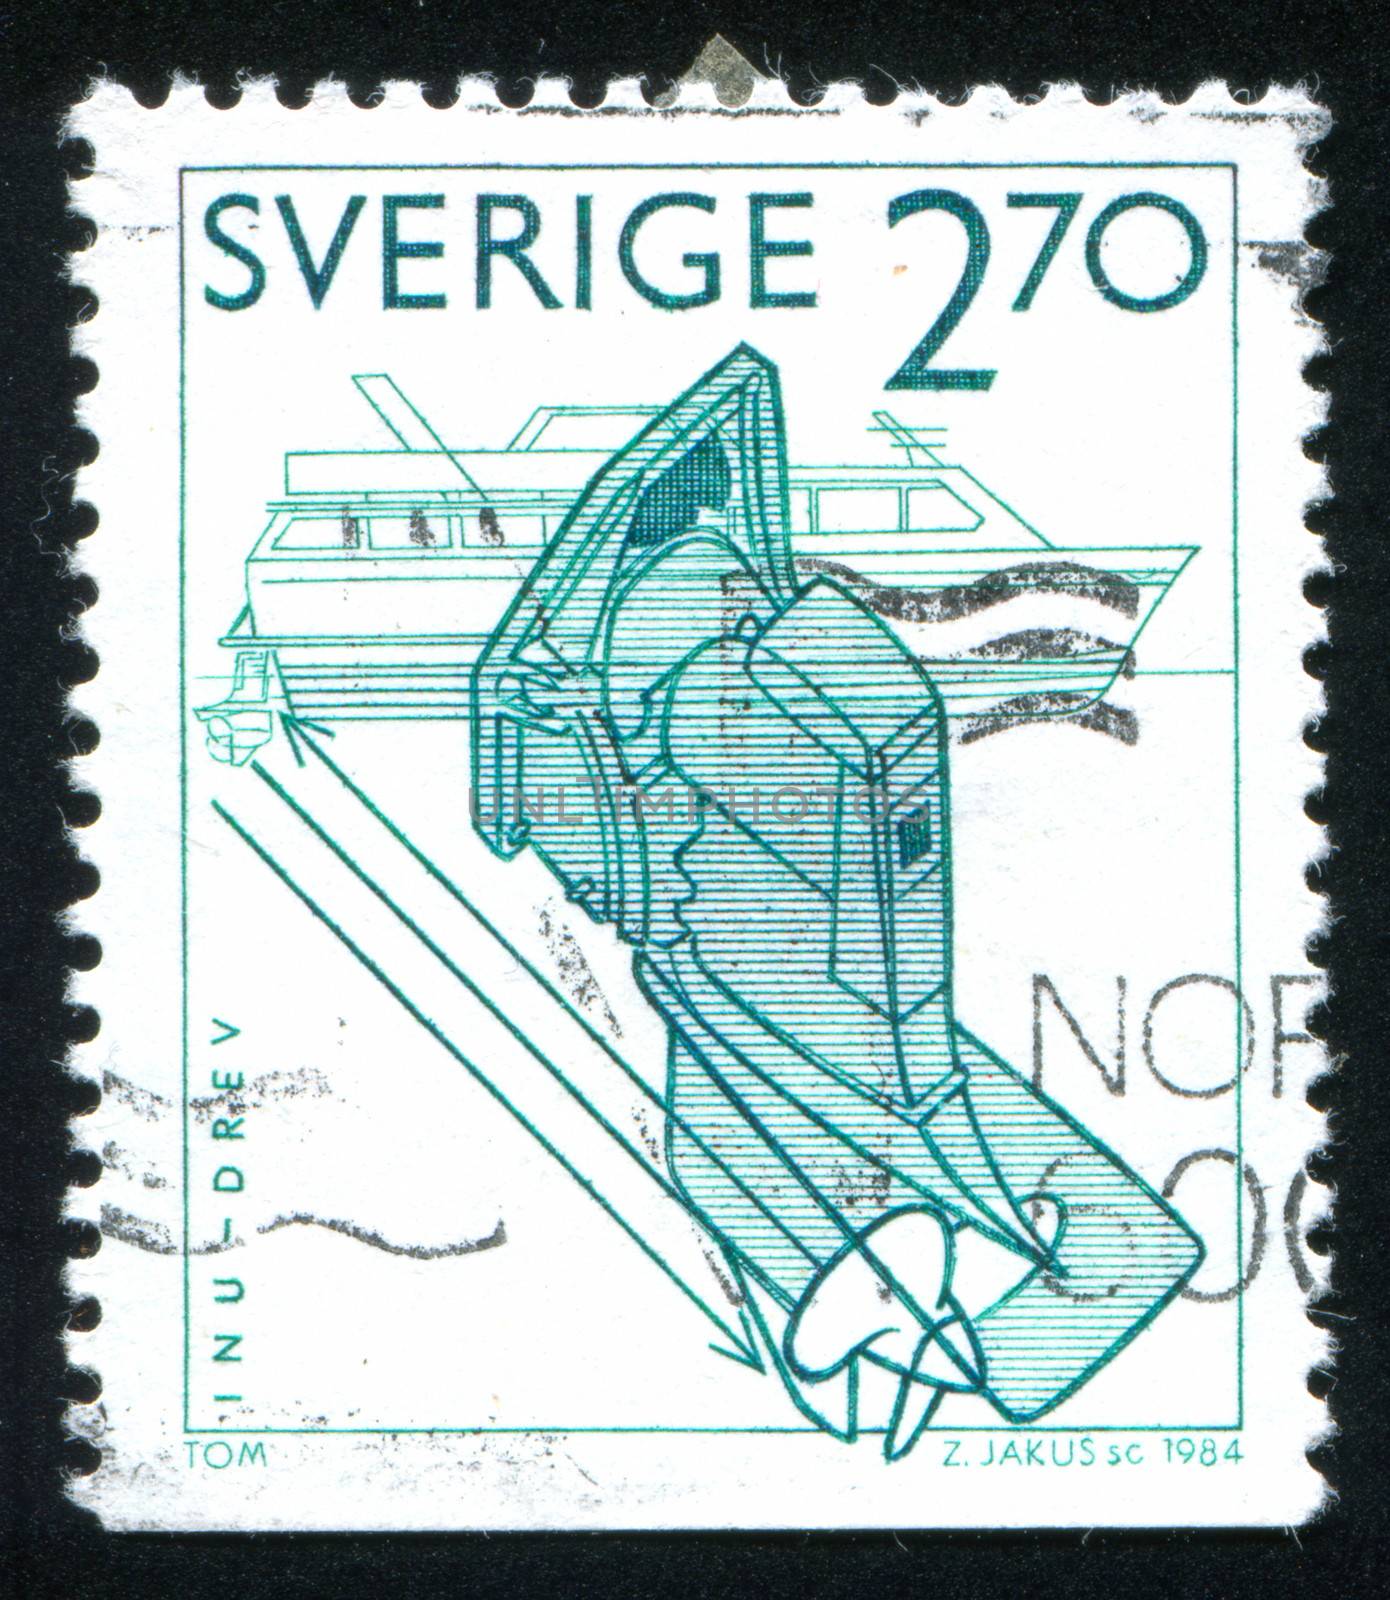 SWEDEN - CIRCA 1984: stamp printed by Sweden, shows Inboard-outboard
motor, circa 1984